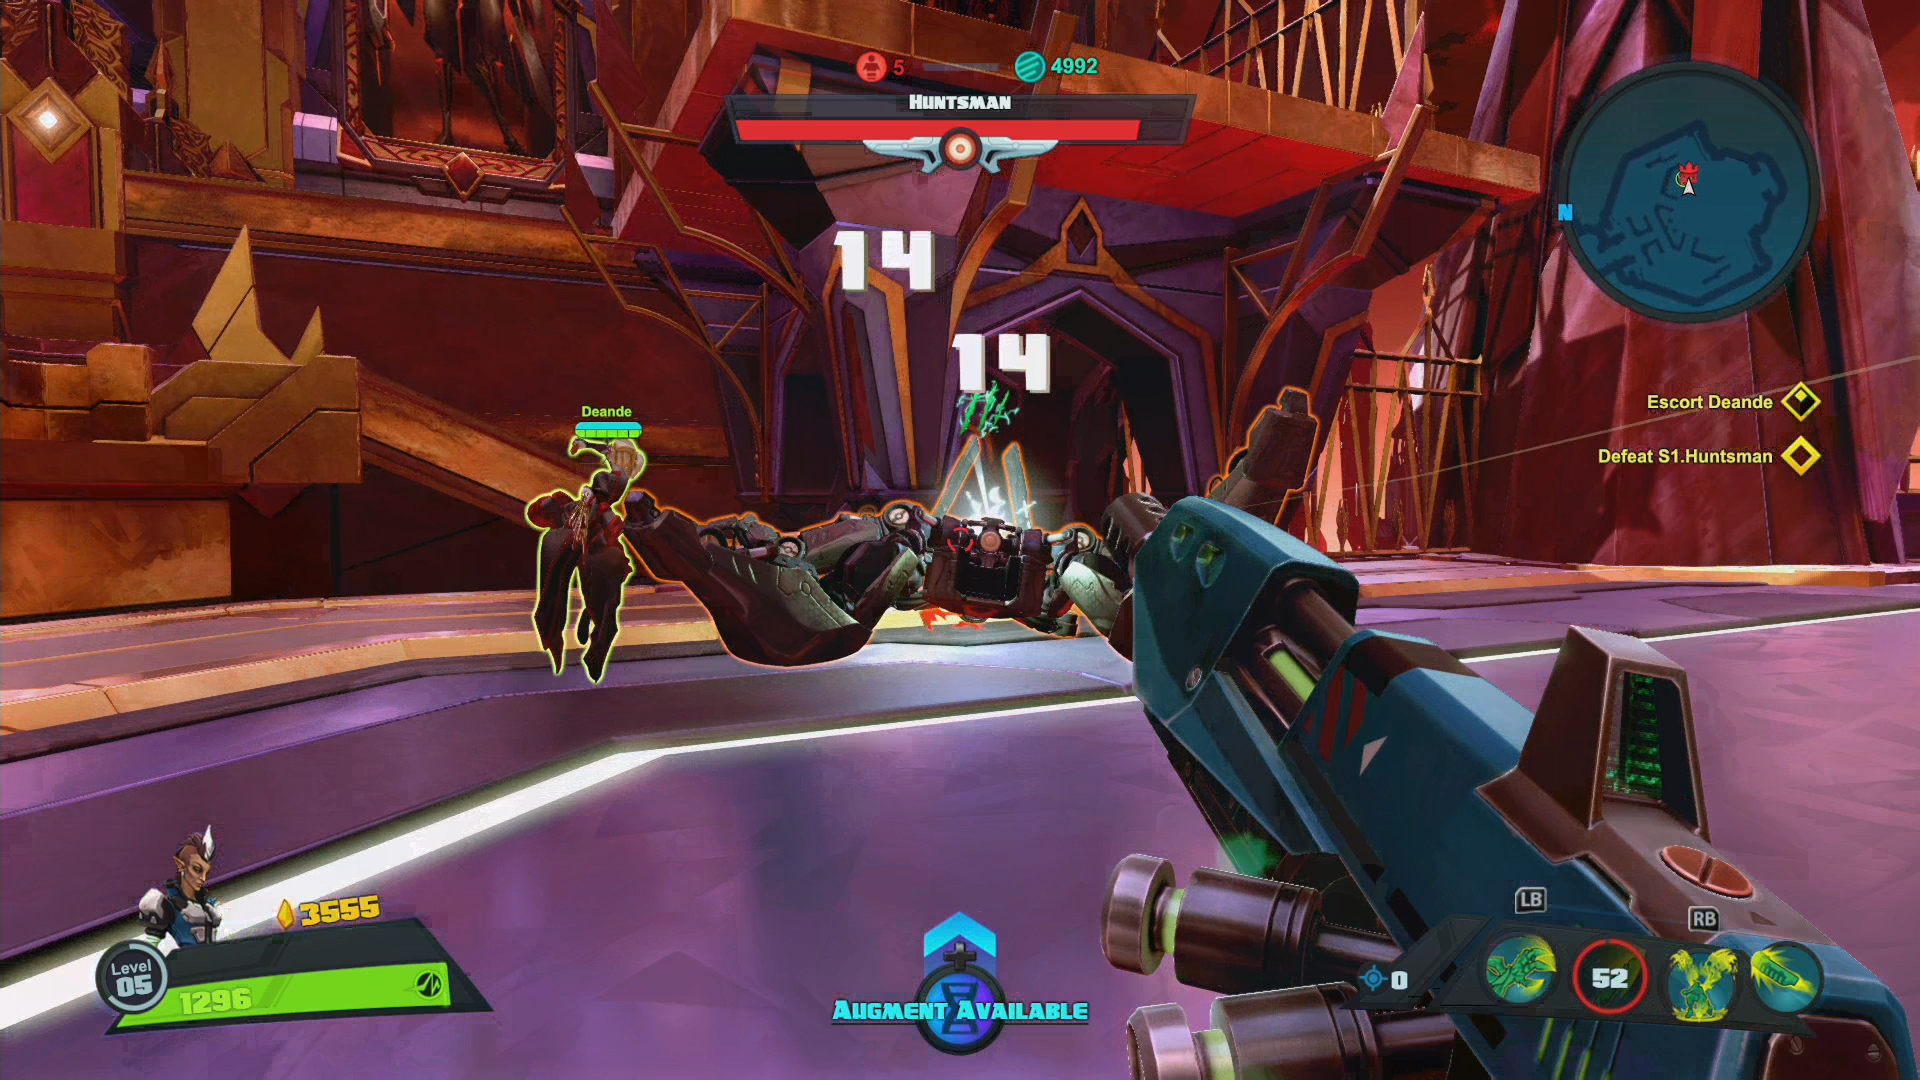 The Best Bit Of Battleborn So Far Can Only Be Played Once